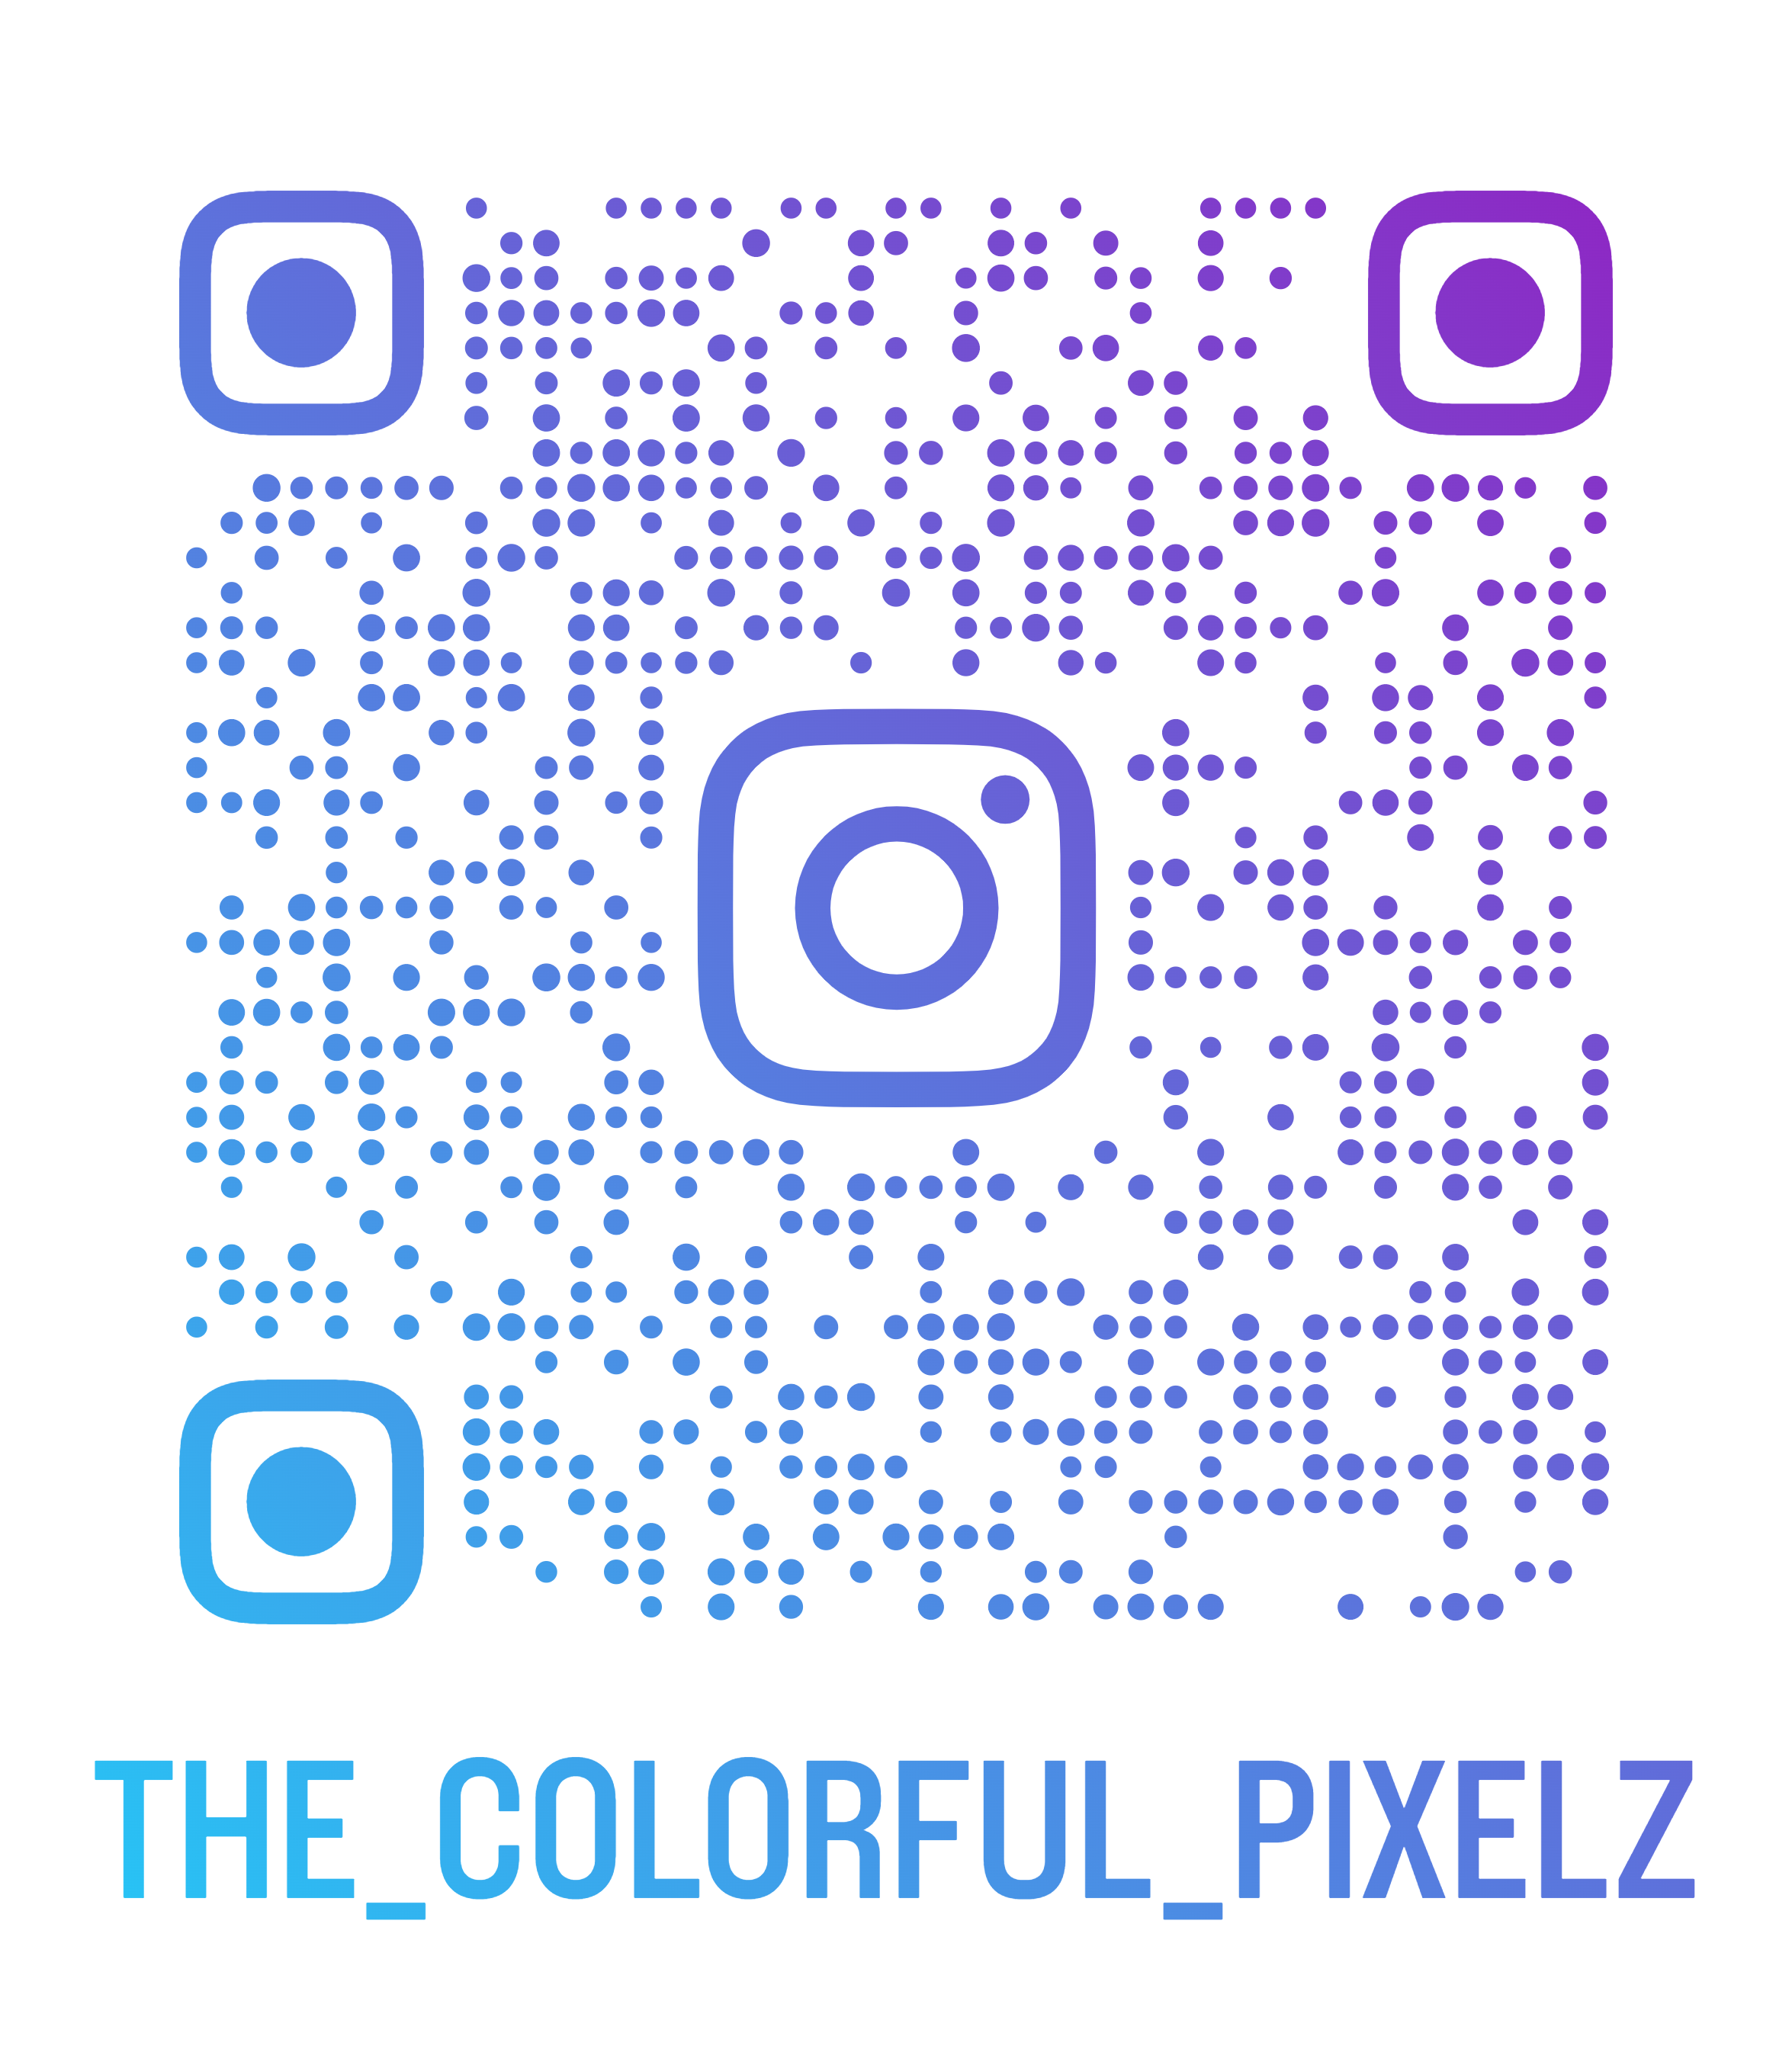 the_colorful_pixelz on Instagram